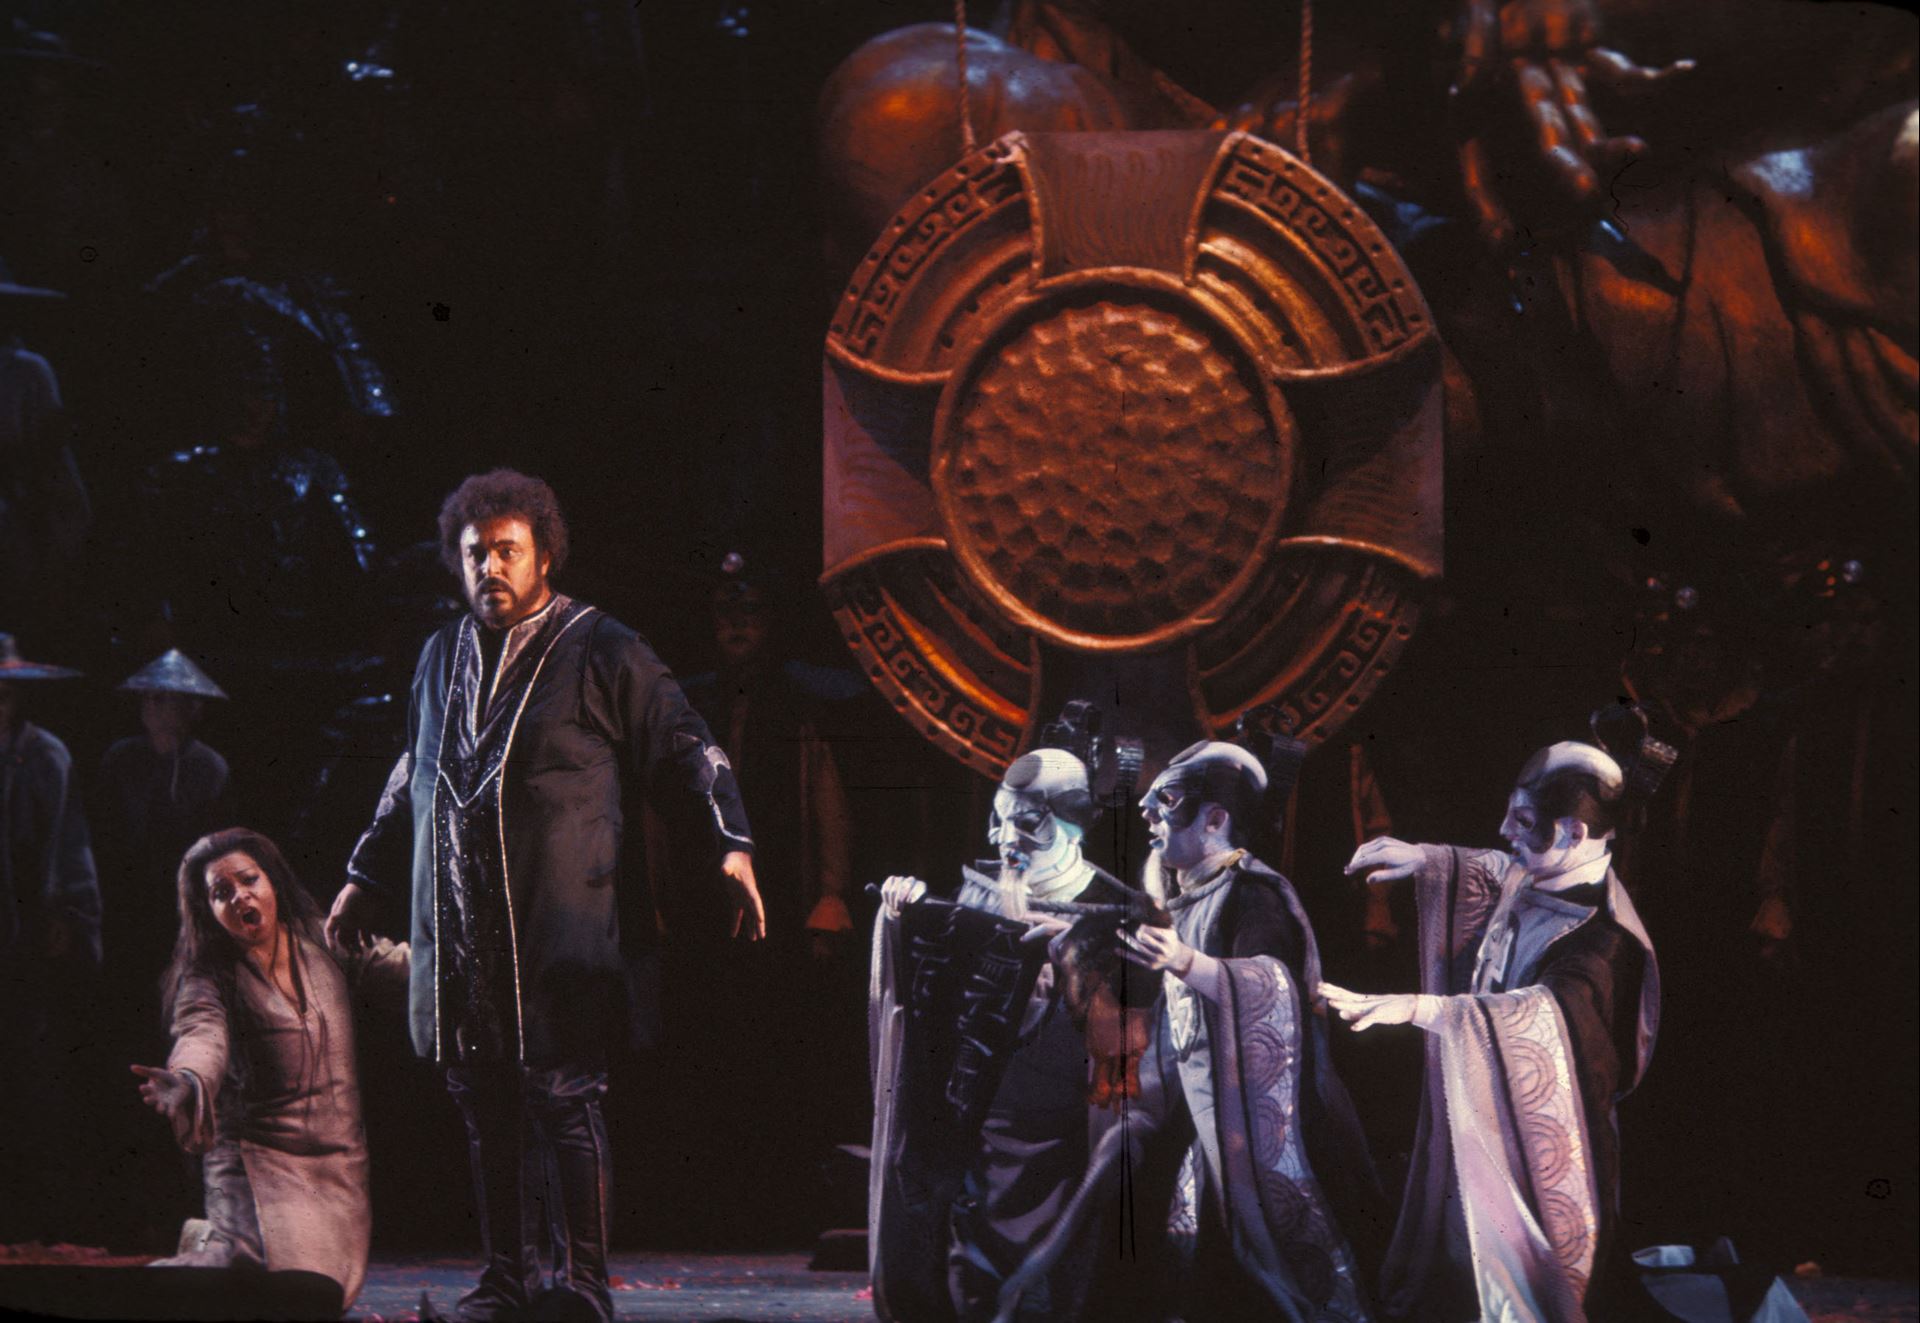 A group of people in costumes standing on a stage, captured in a captivating streaming performance.